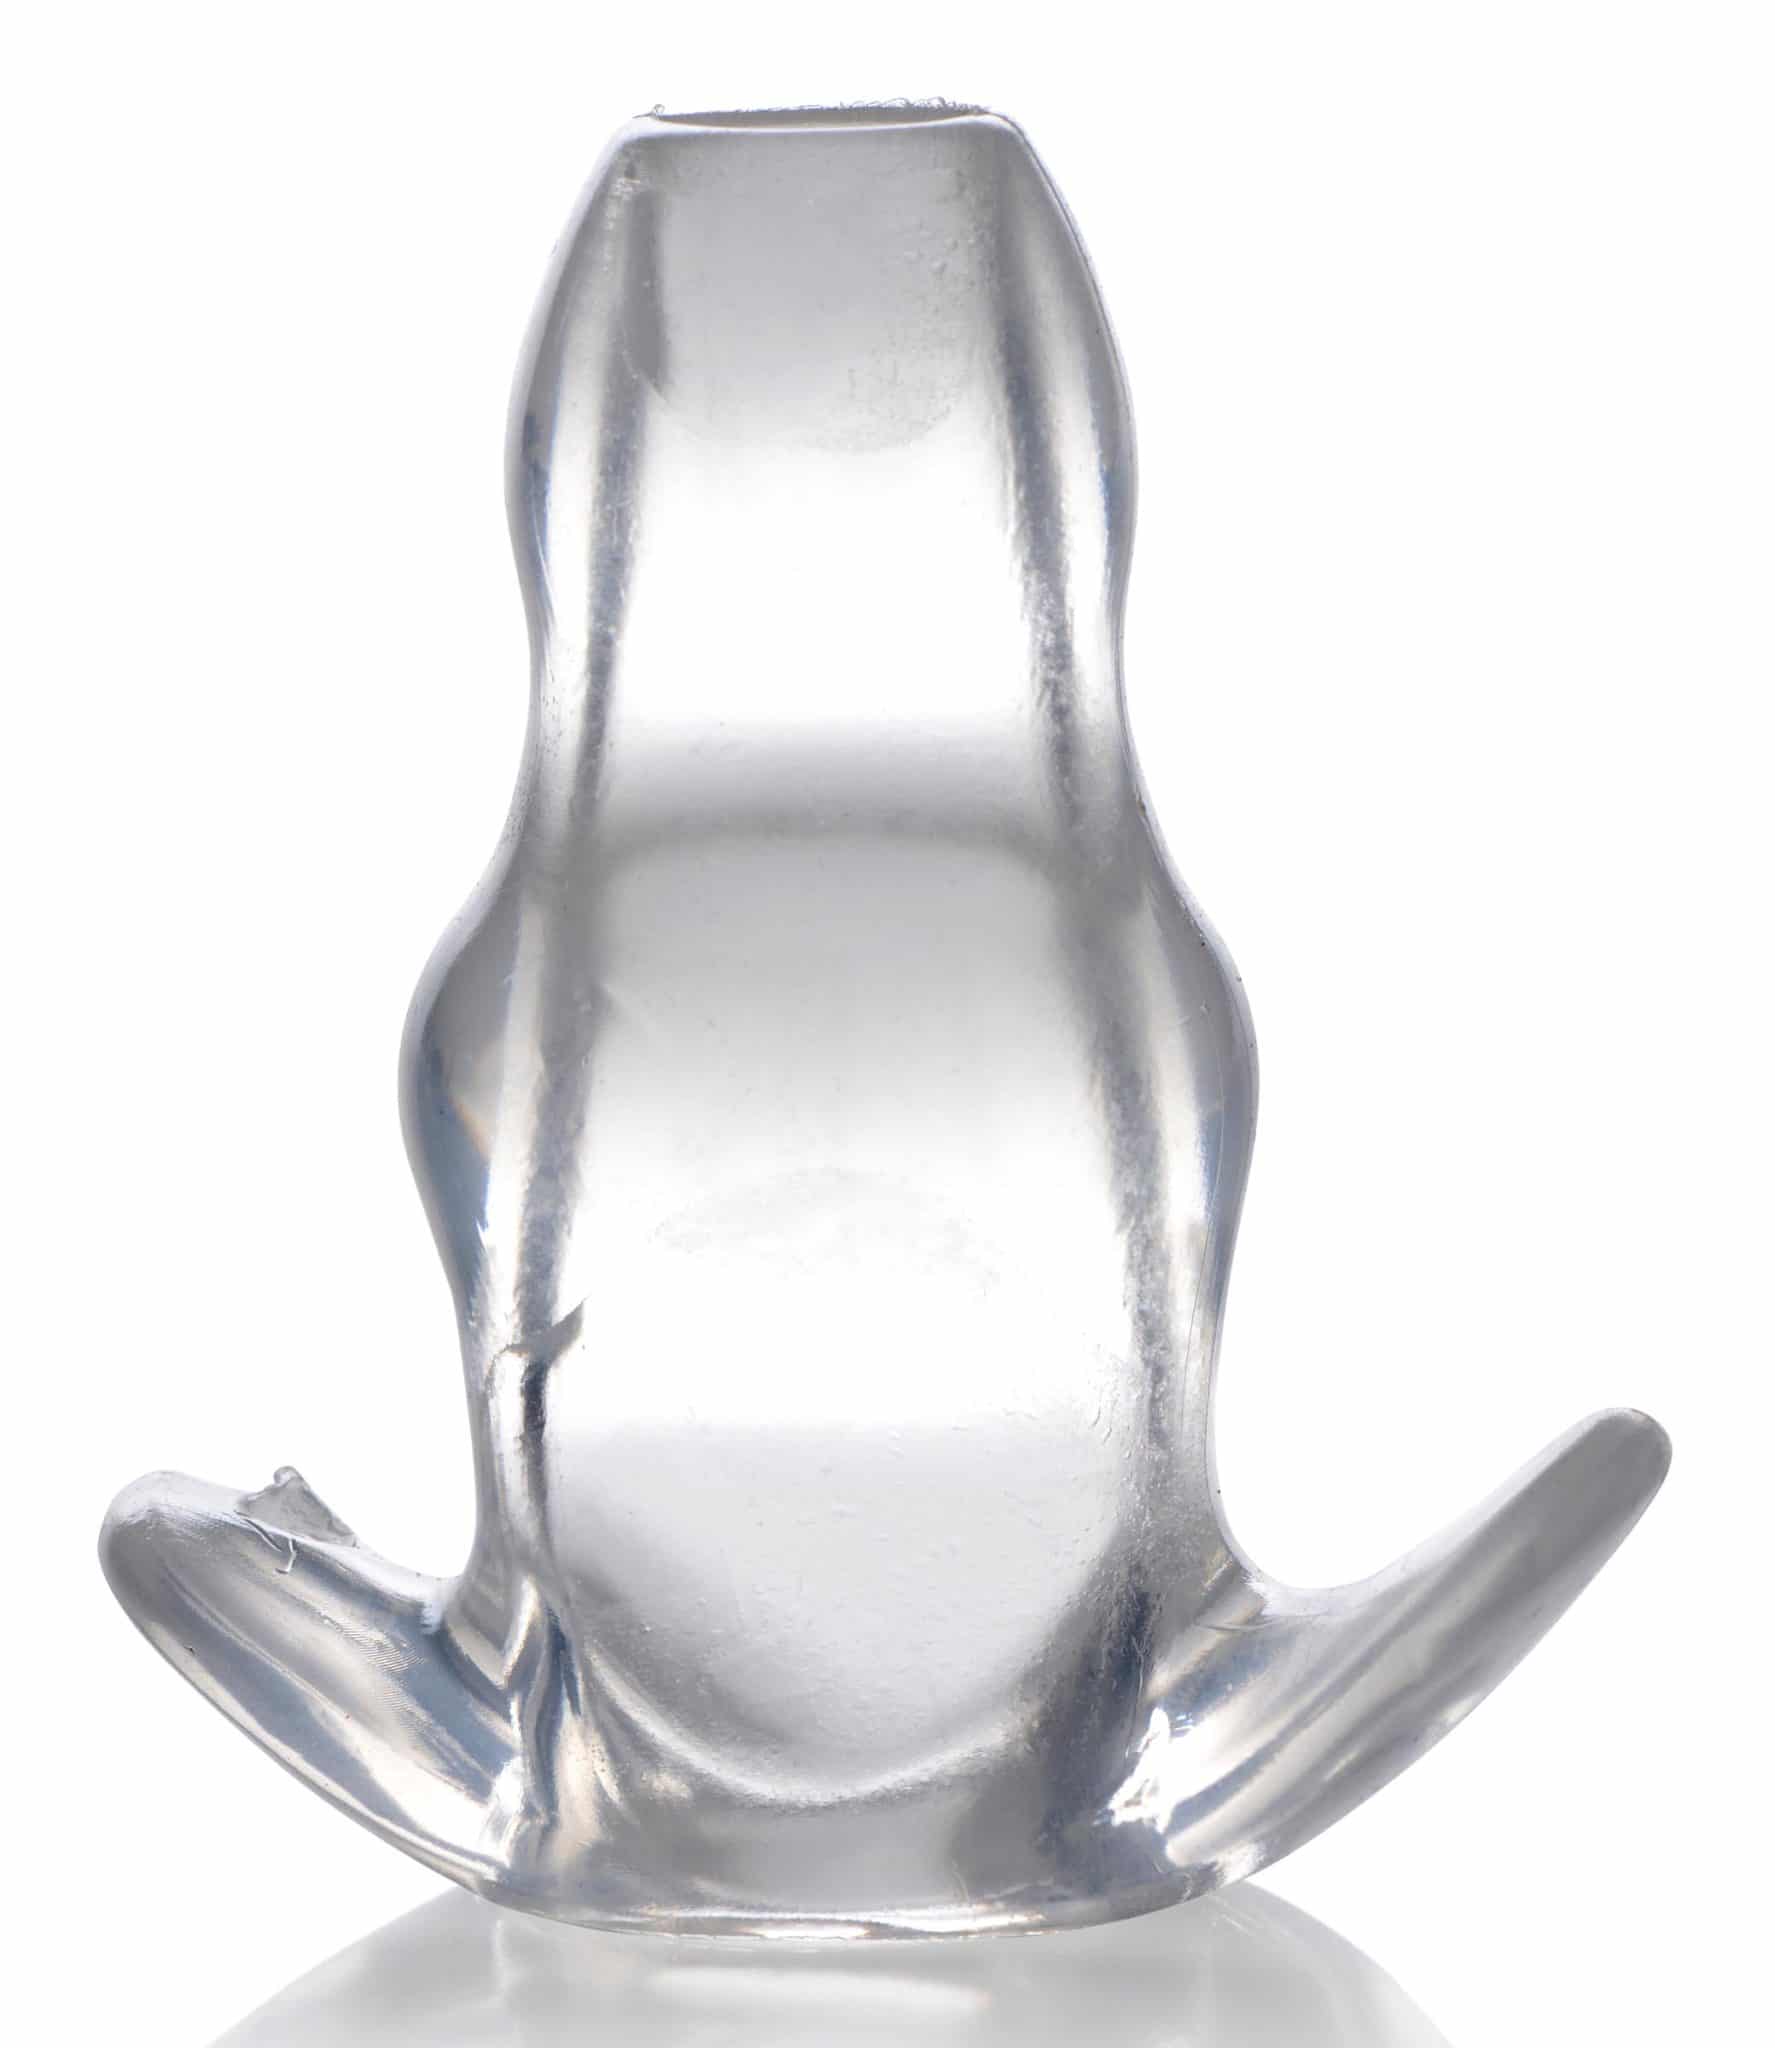 Clear View Hollow Anal Plug - Small-10